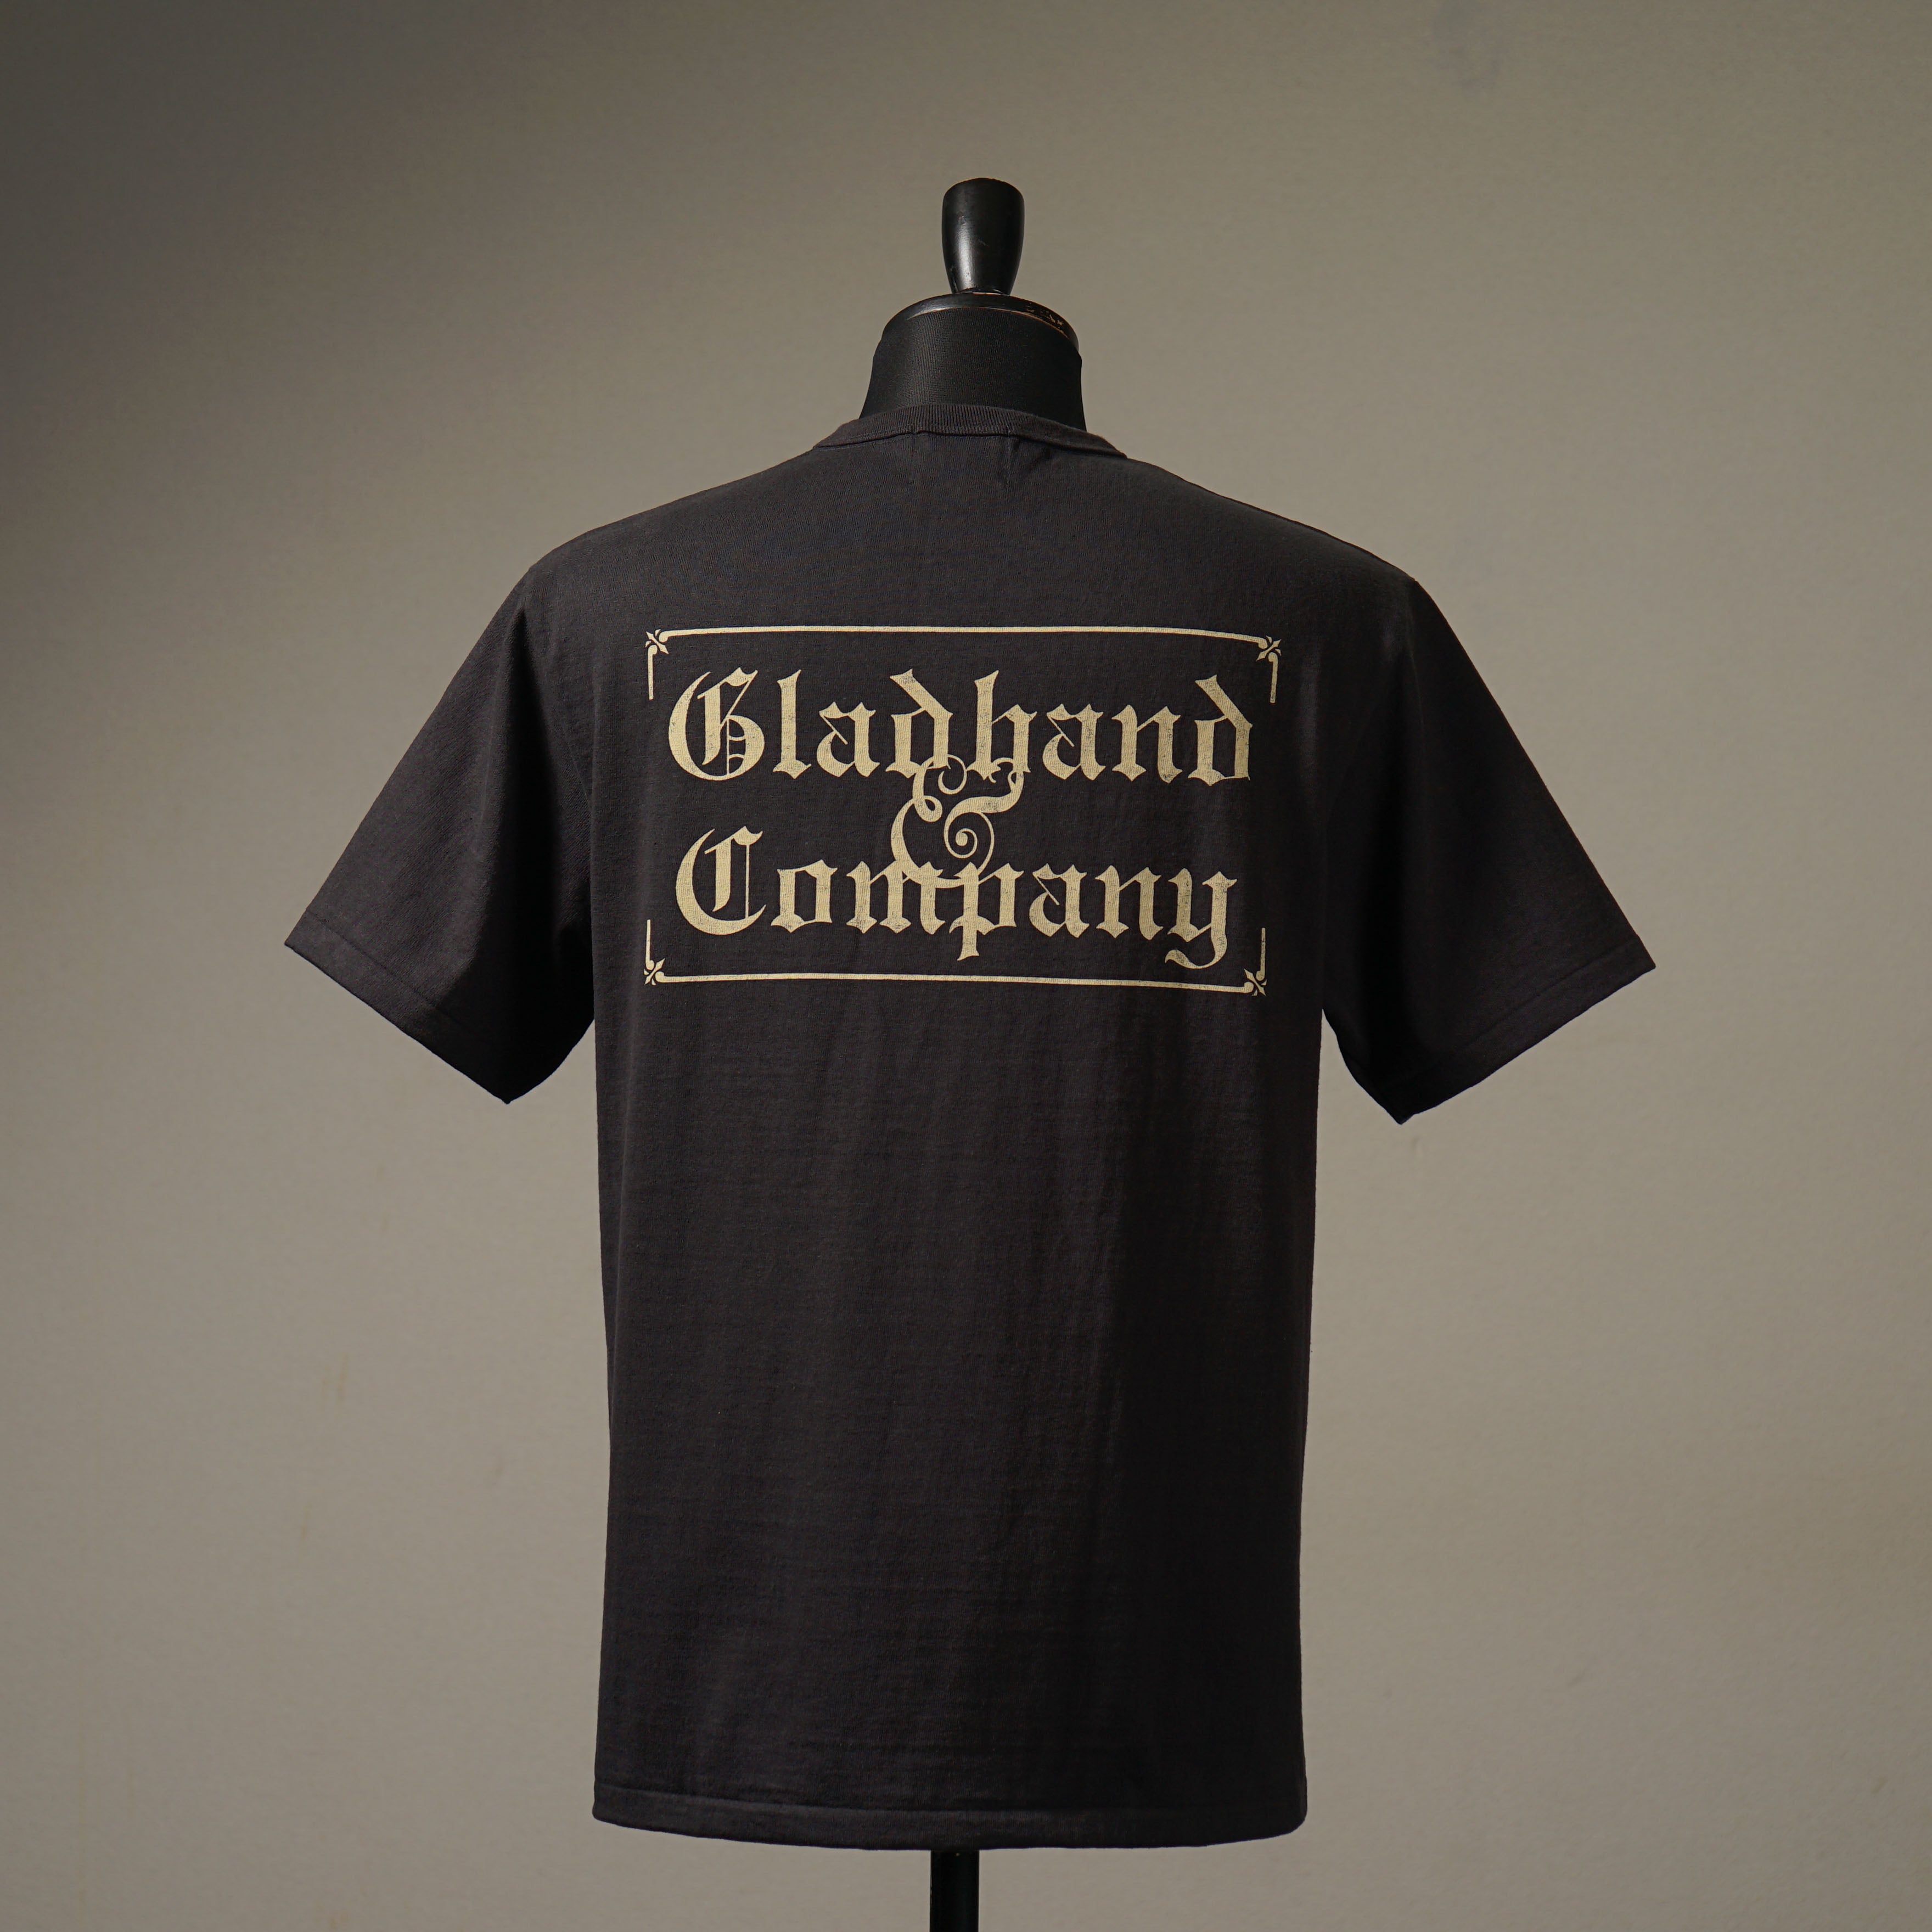 GLAD HAND & Co. Shop – GLADHAND & Co.